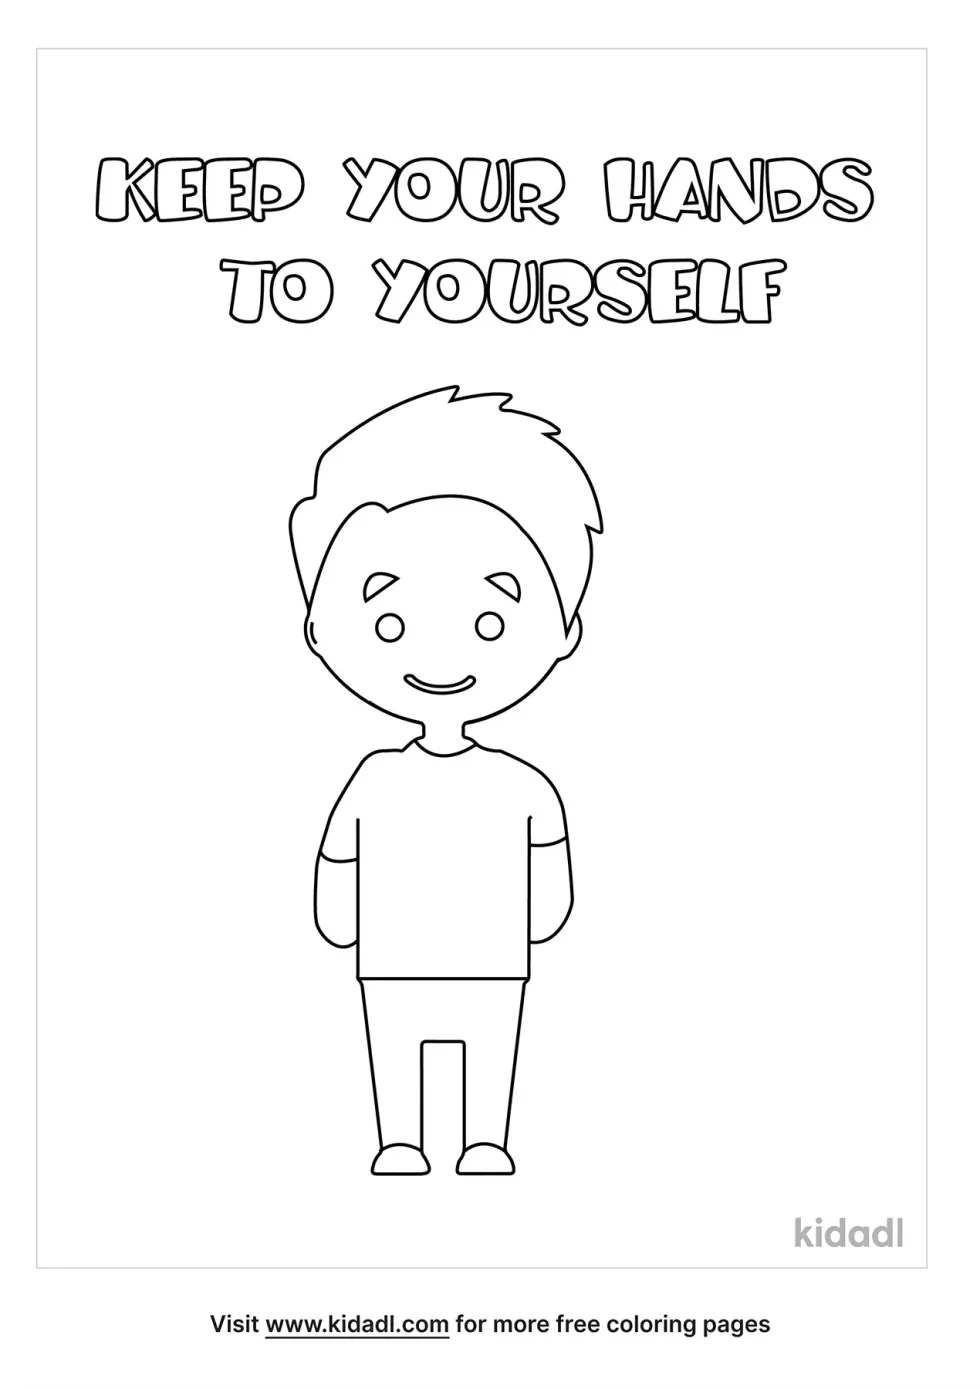 Keep Your Hands To Yourself Coloring Page